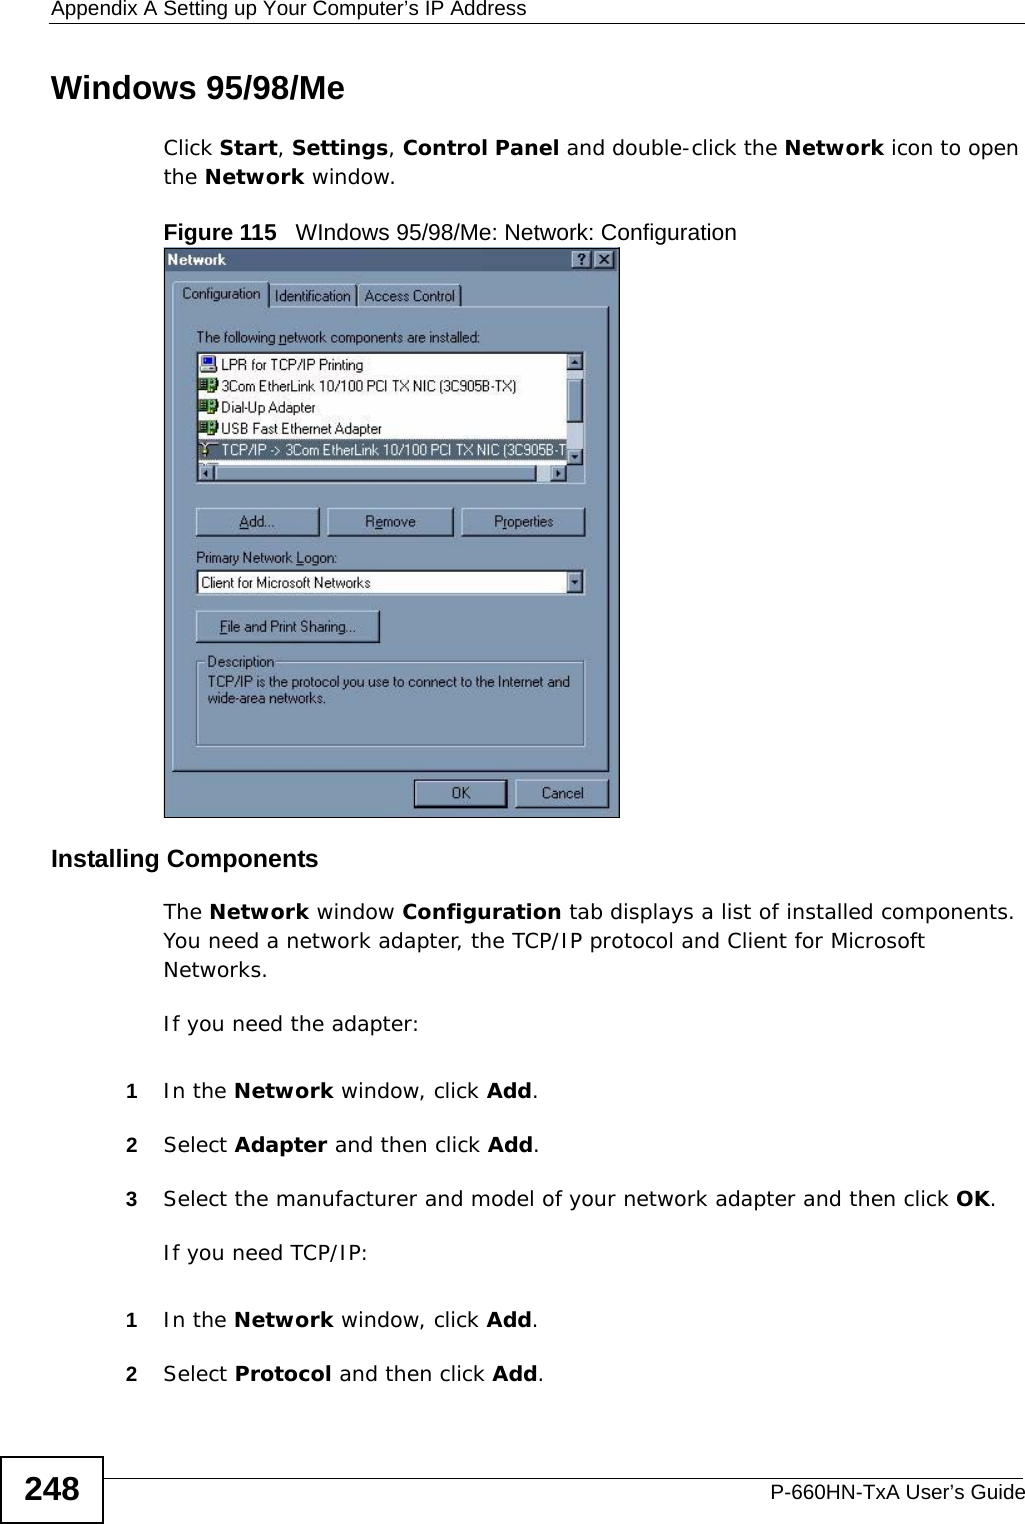 Appendix A Setting up Your Computer’s IP AddressP-660HN-TxA User’s Guide248Windows 95/98/MeClick Start, Settings, Control Panel and double-click the Network icon to open the Network window.Figure 115   WIndows 95/98/Me: Network: ConfigurationInstalling ComponentsThe Network window Configuration tab displays a list of installed components. You need a network adapter, the TCP/IP protocol and Client for Microsoft Networks.If you need the adapter:1In the Network window, click Add.2Select Adapter and then click Add.3Select the manufacturer and model of your network adapter and then click OK.If you need TCP/IP:1In the Network window, click Add.2Select Protocol and then click Add.